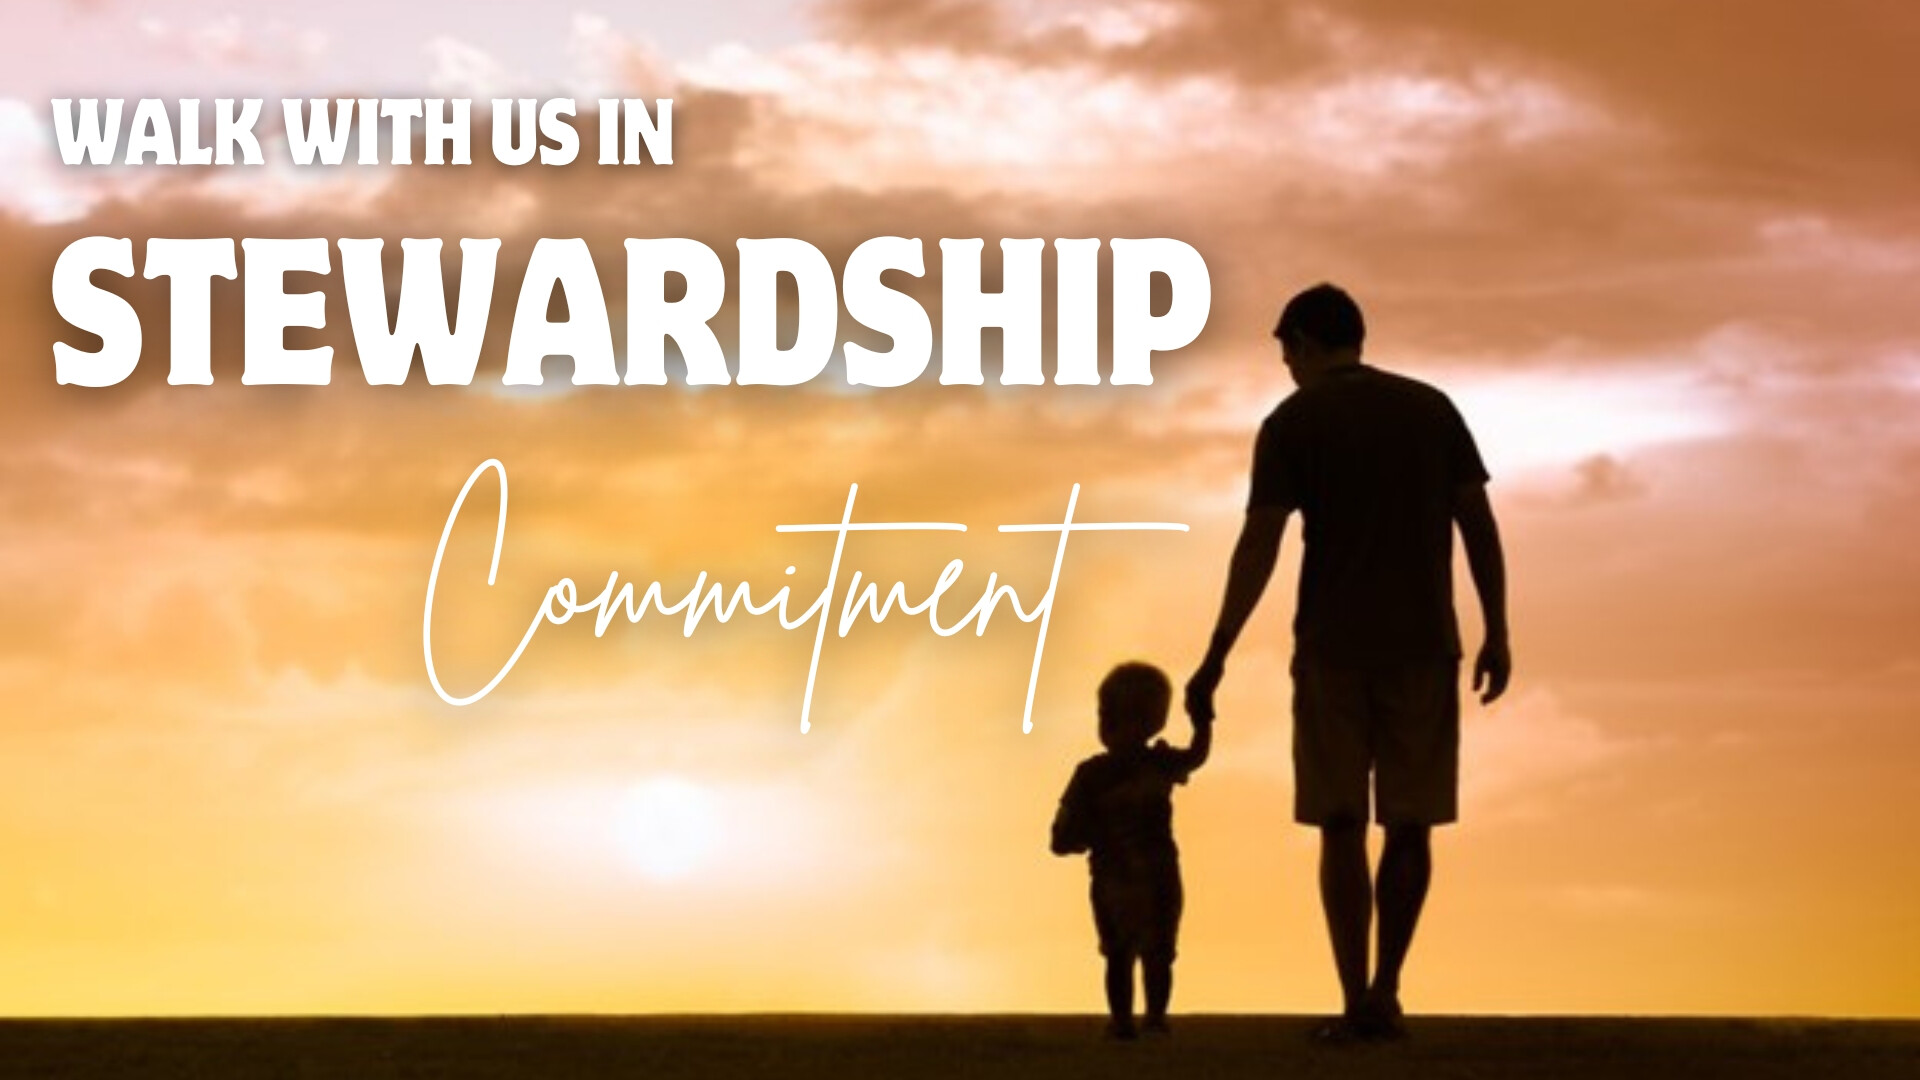 Walk With Us In Stewardship: Commitment